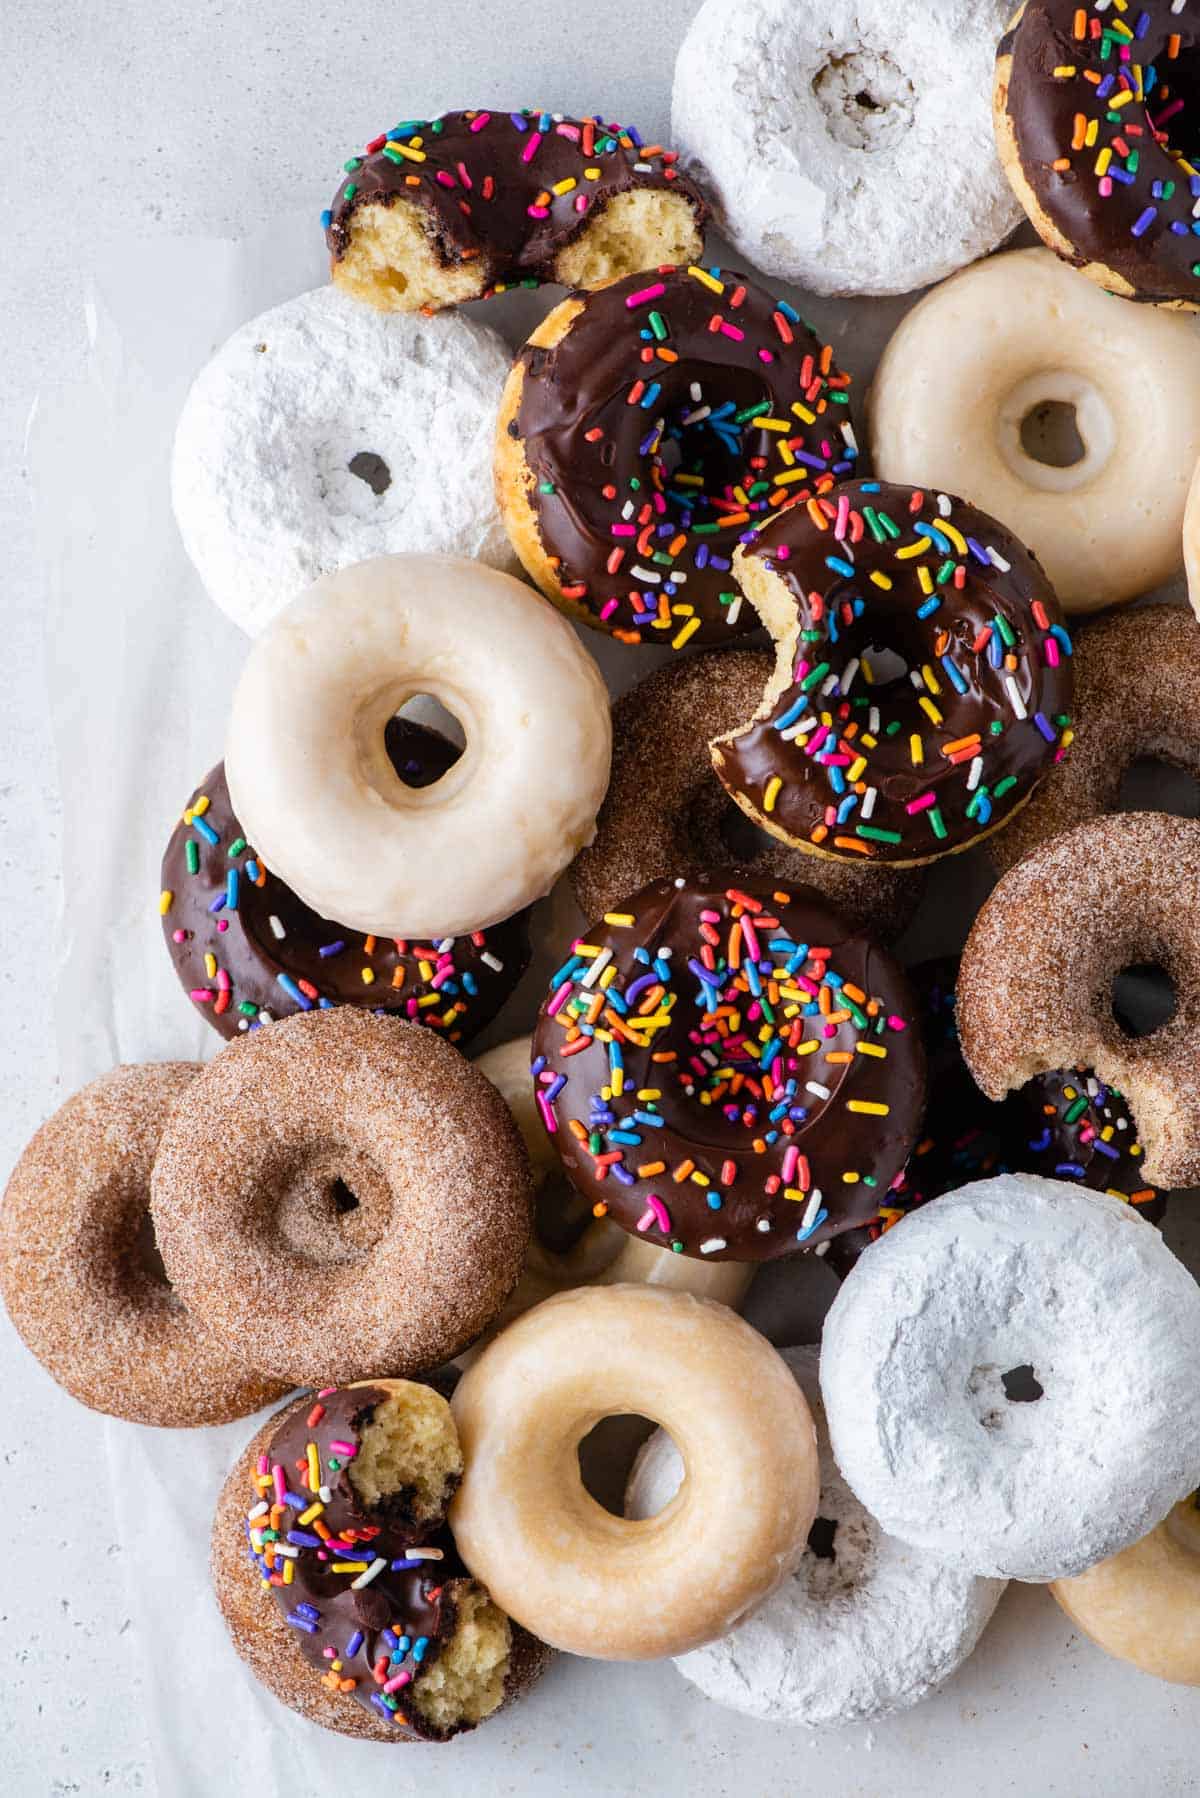 baked donuts with a variety of glazes arranged on white background